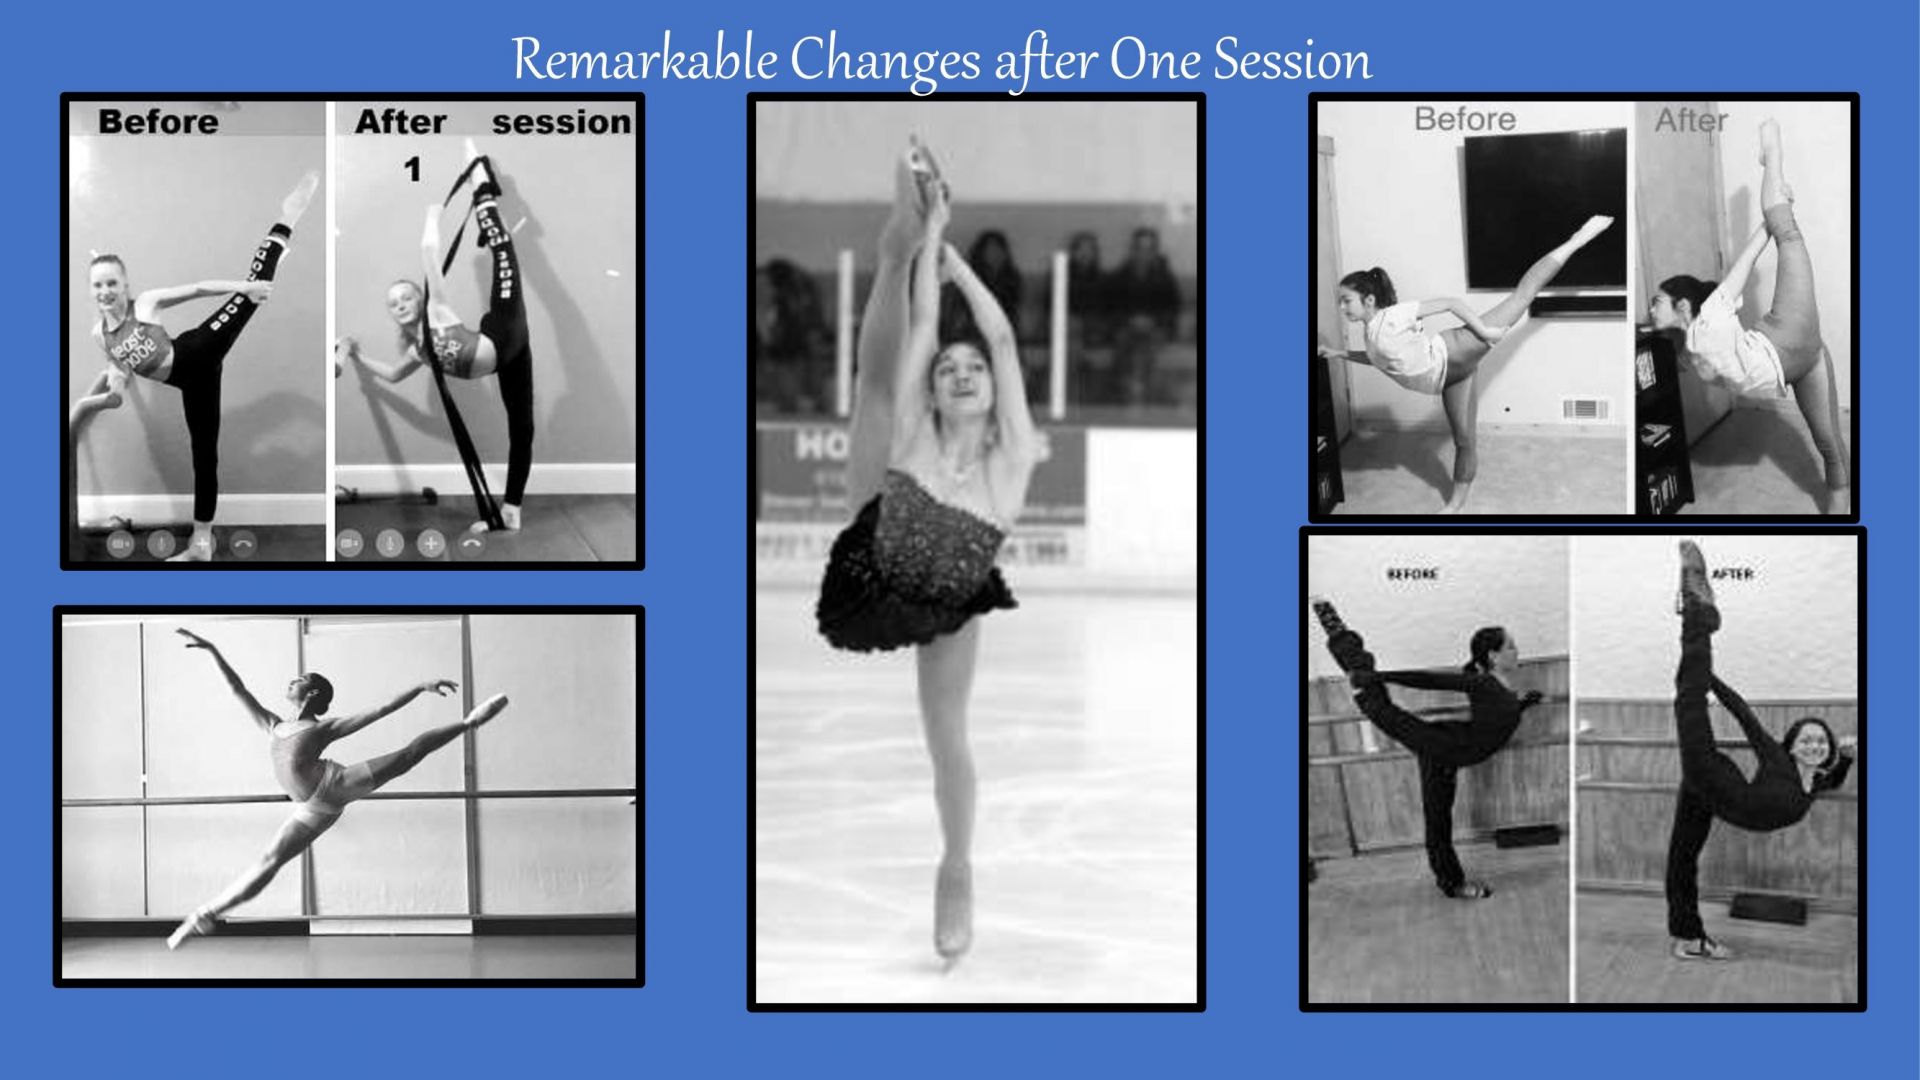 Remarkable changes after 1 flexibility session figure skater on ice holding skate with leg up behind her. ballerina splits leap & 3 other dancers increased range of motion